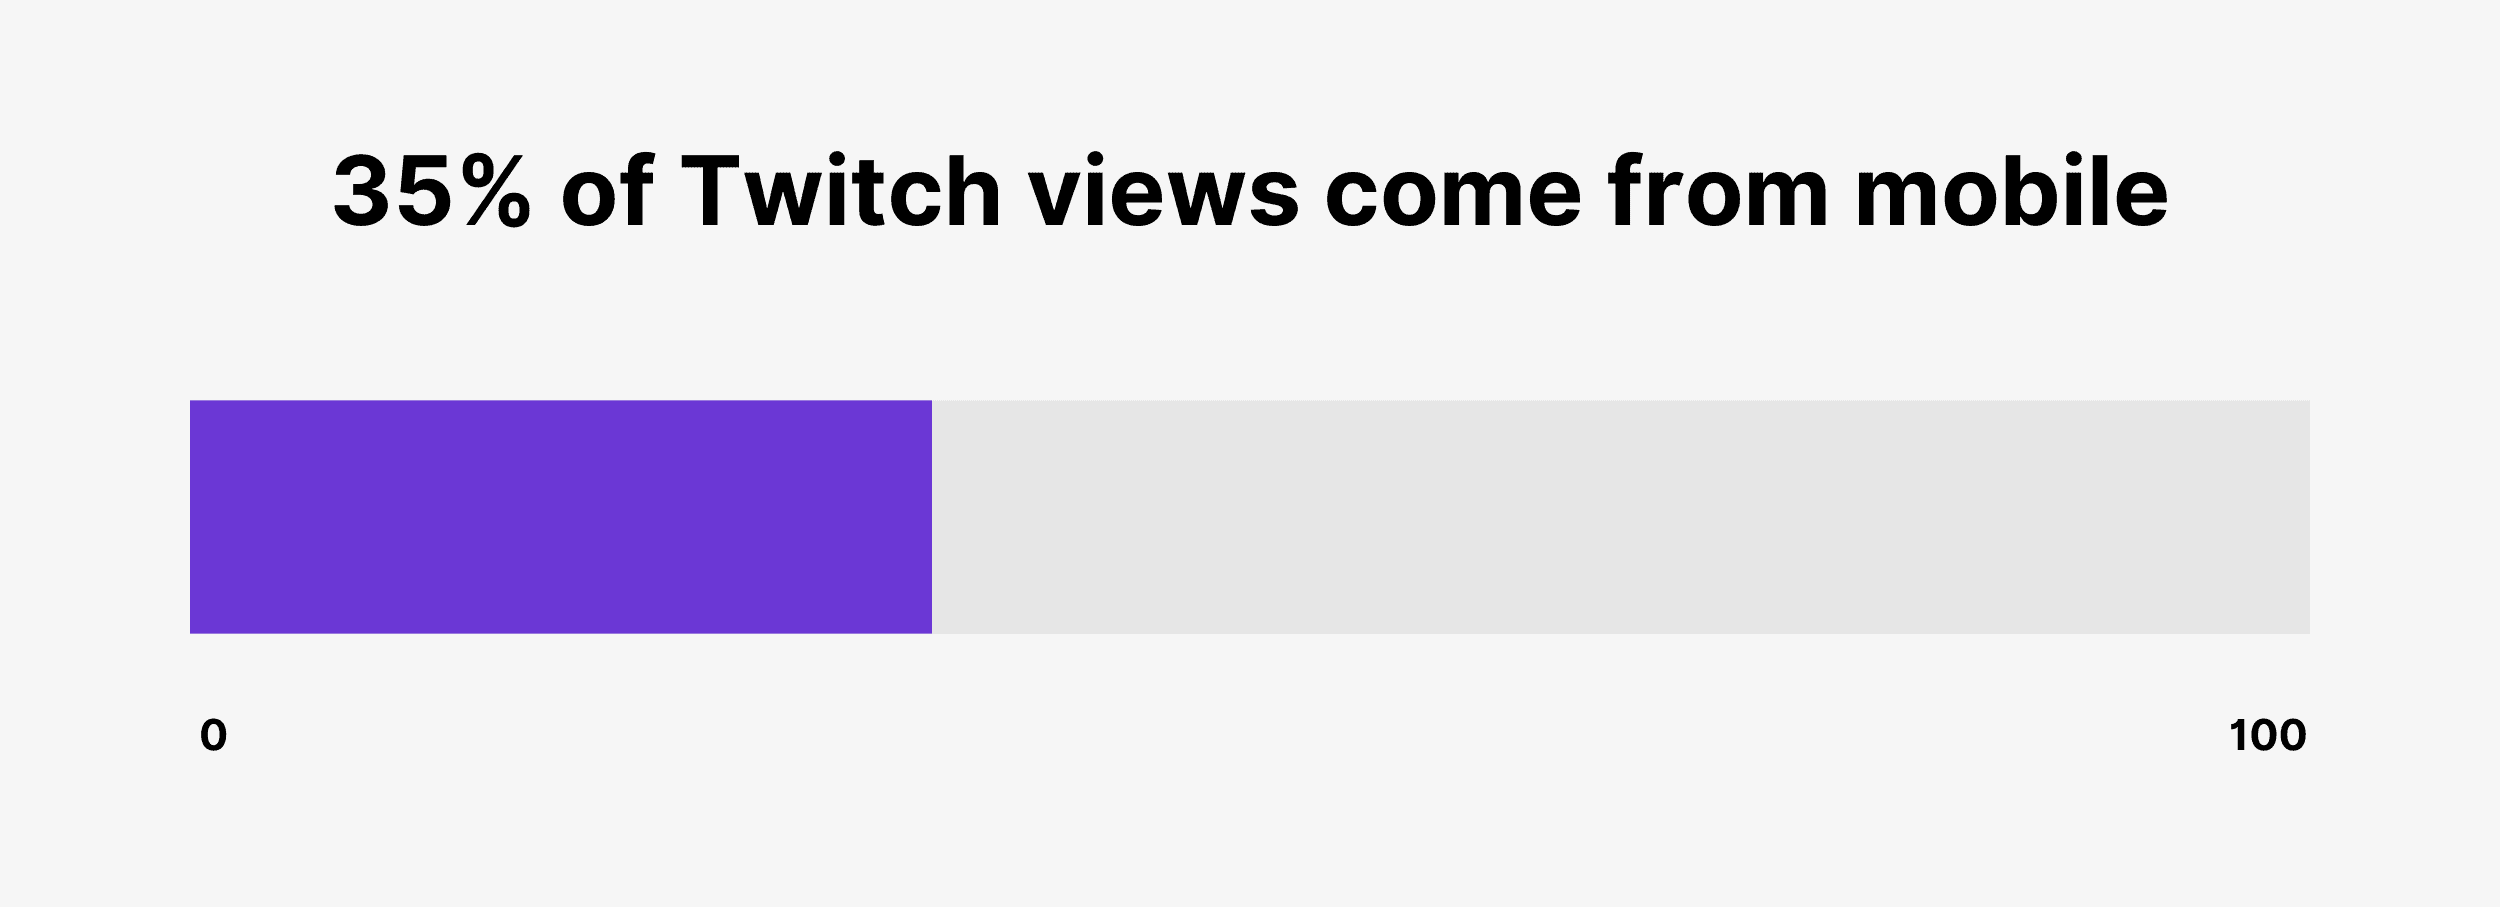 35% of Twitch views come from mobile